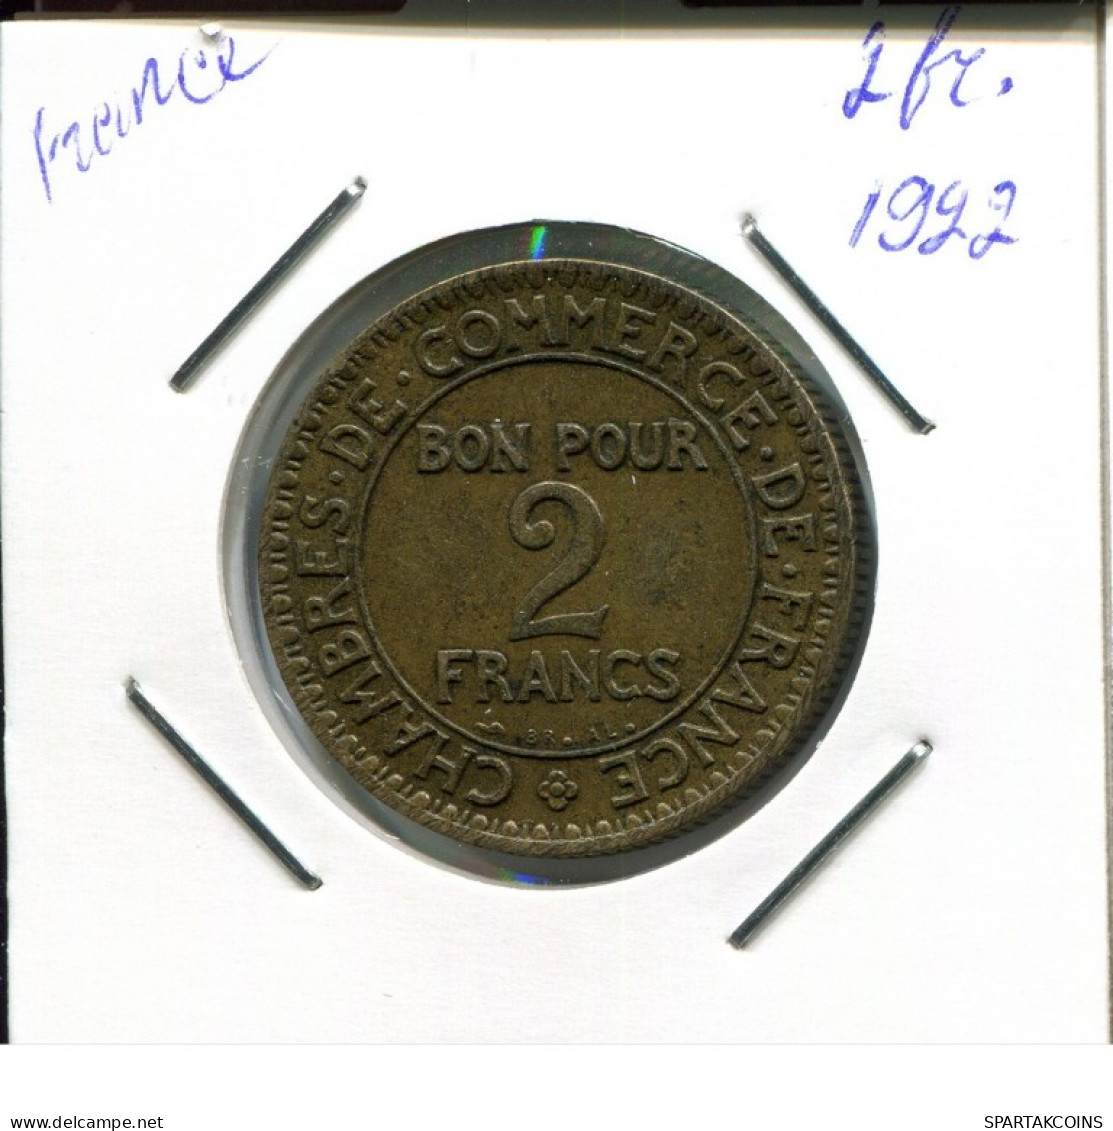 2 FRANCS 1922 FRANCE French Coin #AN779.U.A - 2 Francs